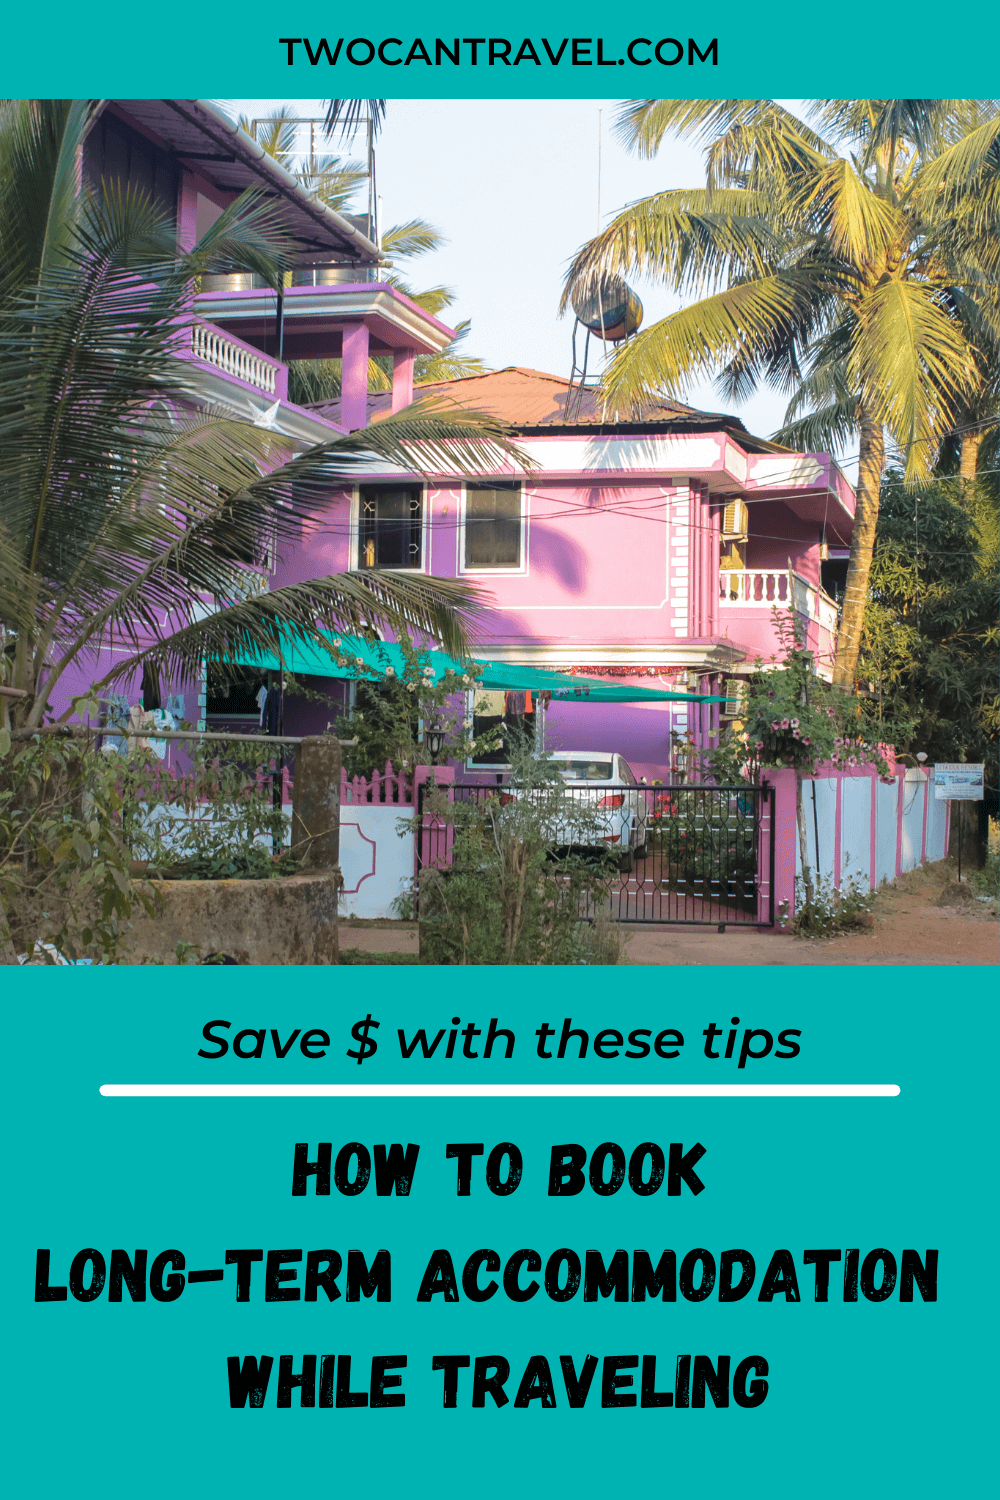 Text: How to Book Long Term Accommodation While Traveling. Save money with these six ways you can find long-term accommodation slow travel. Two Can Travel dot com Image is of a purple house with palm trees on either side. 